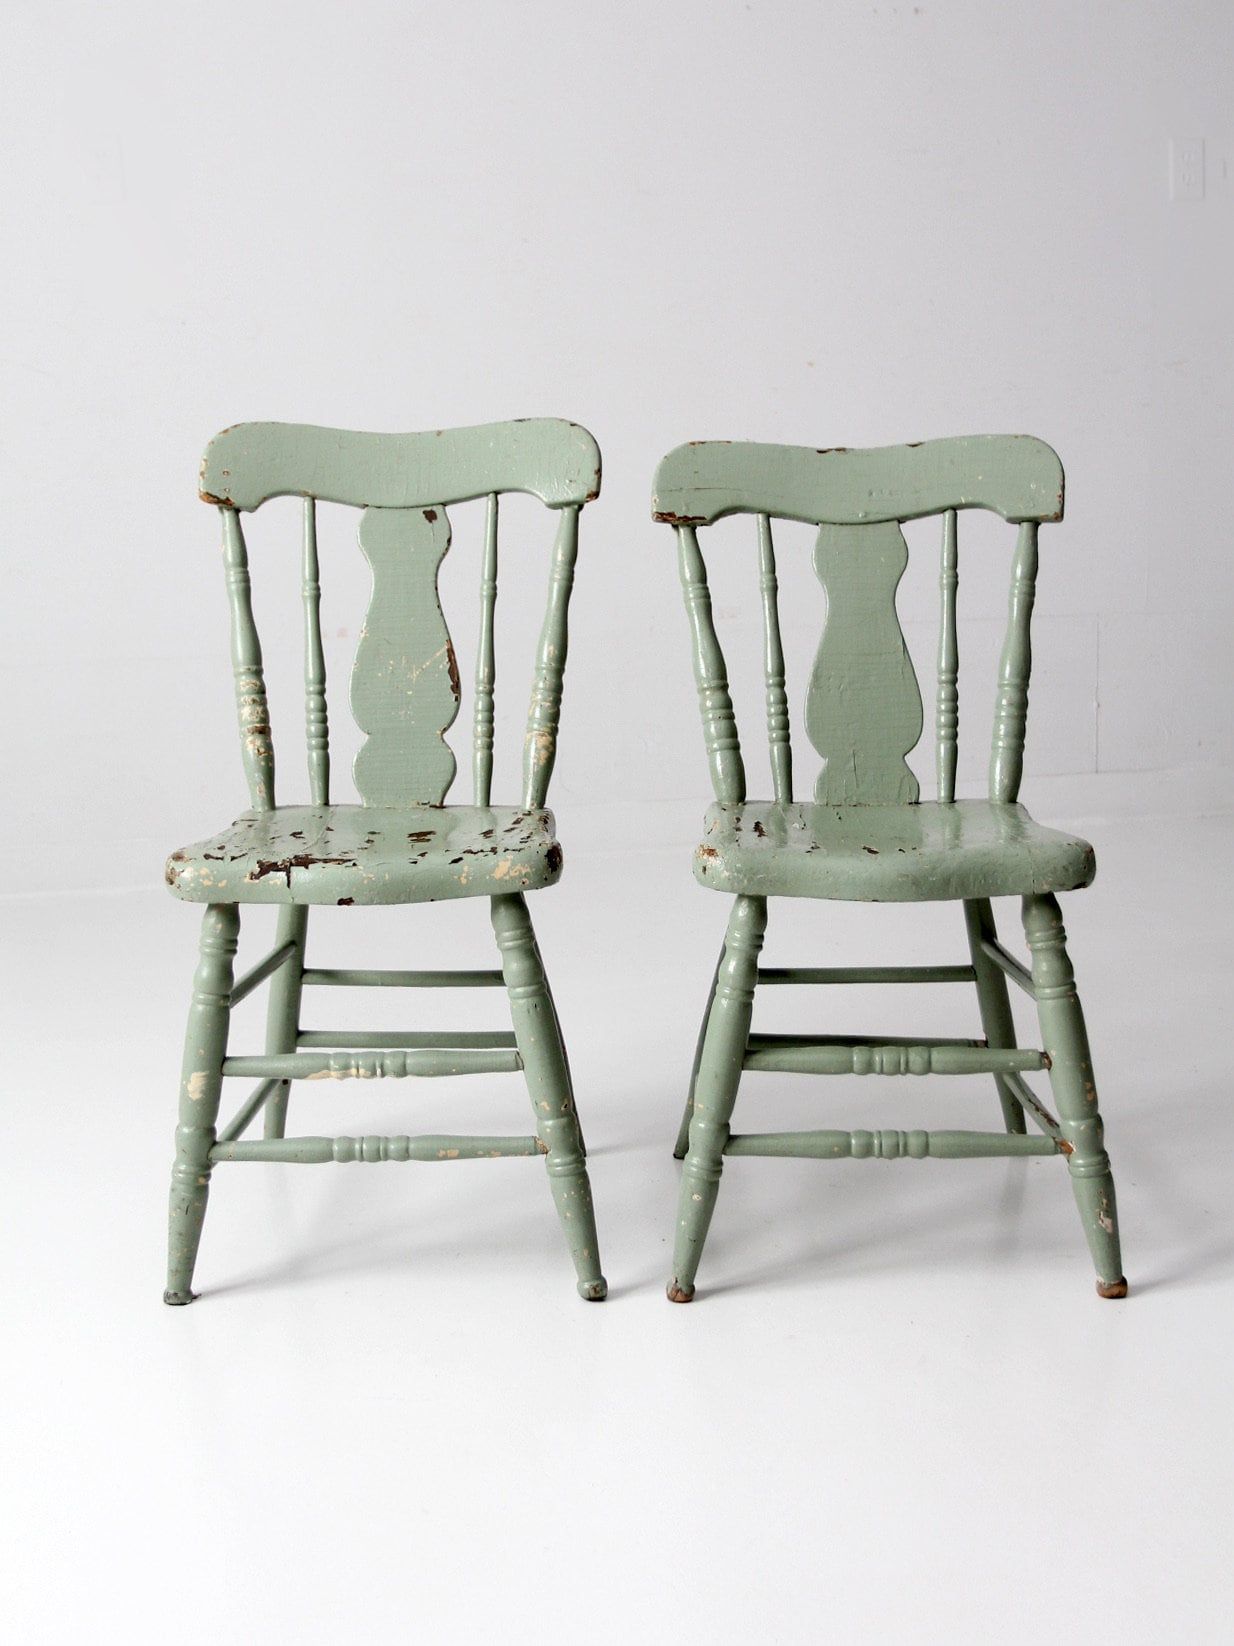 The Timeless Beauty of Antique Wooden Chairs